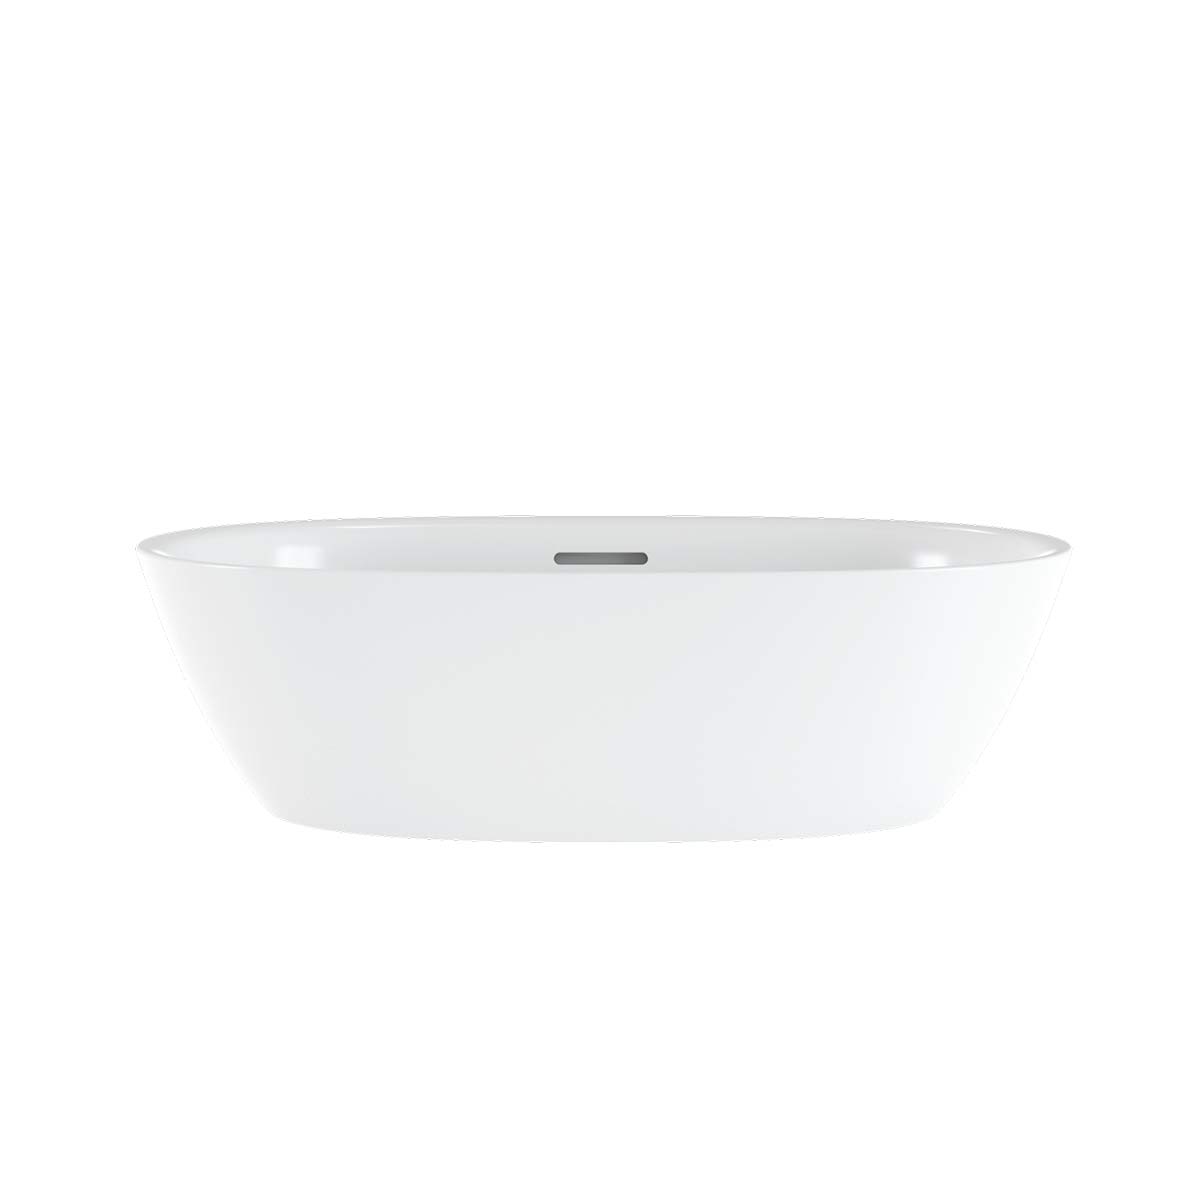 Victoria + Albert Lussari 55 basin in gloss white. Also available in matt white or custom colour exterior paint in any matt or gloss colour. Distributed in Australia by Luxe by Design, Brisbane.